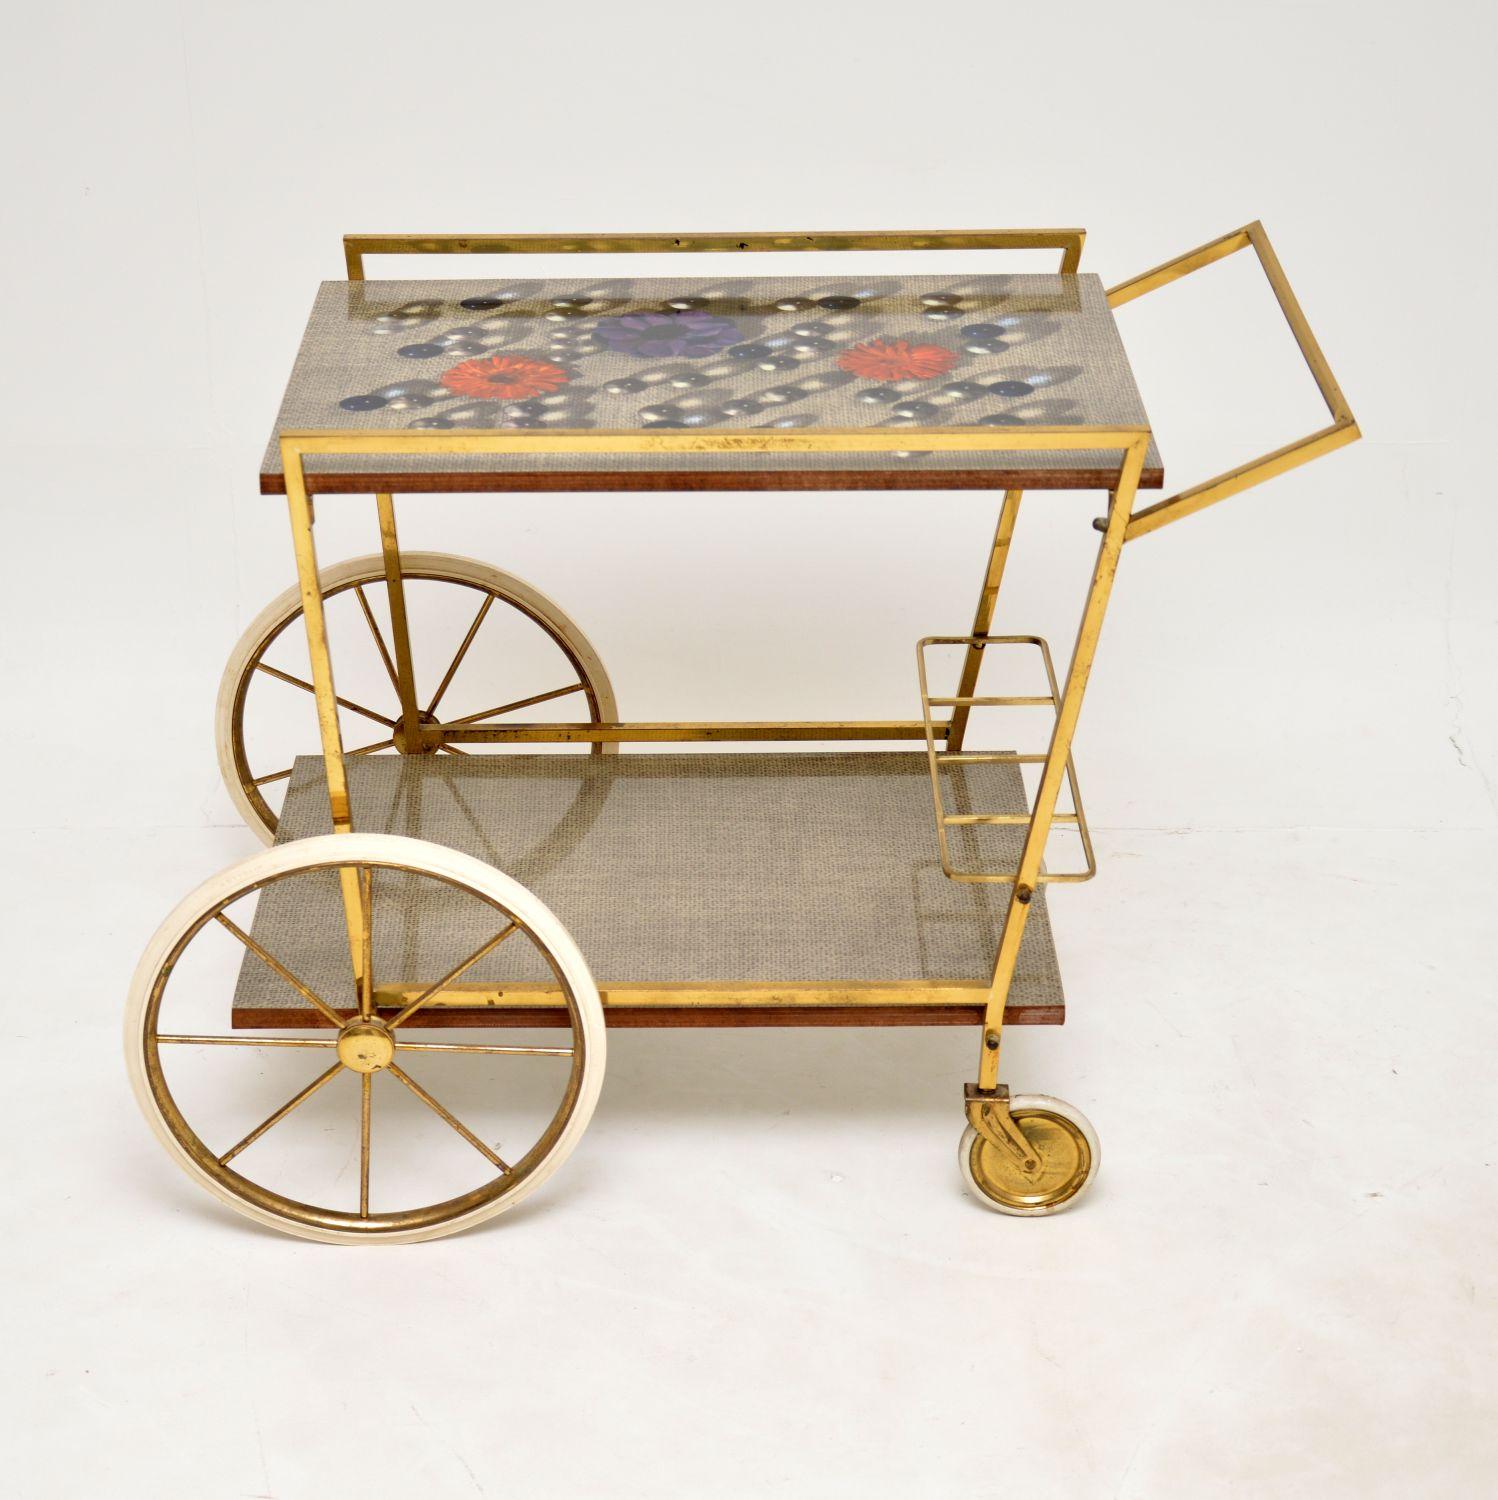 A stunning vintage drinks trolley in solid brass and Formica. This was made in Italy, it dates from the 1960’s.

It has a gorgeous, angular design and is a lovely size. The Formica tops are a beautiful addition, and are reminiscent of